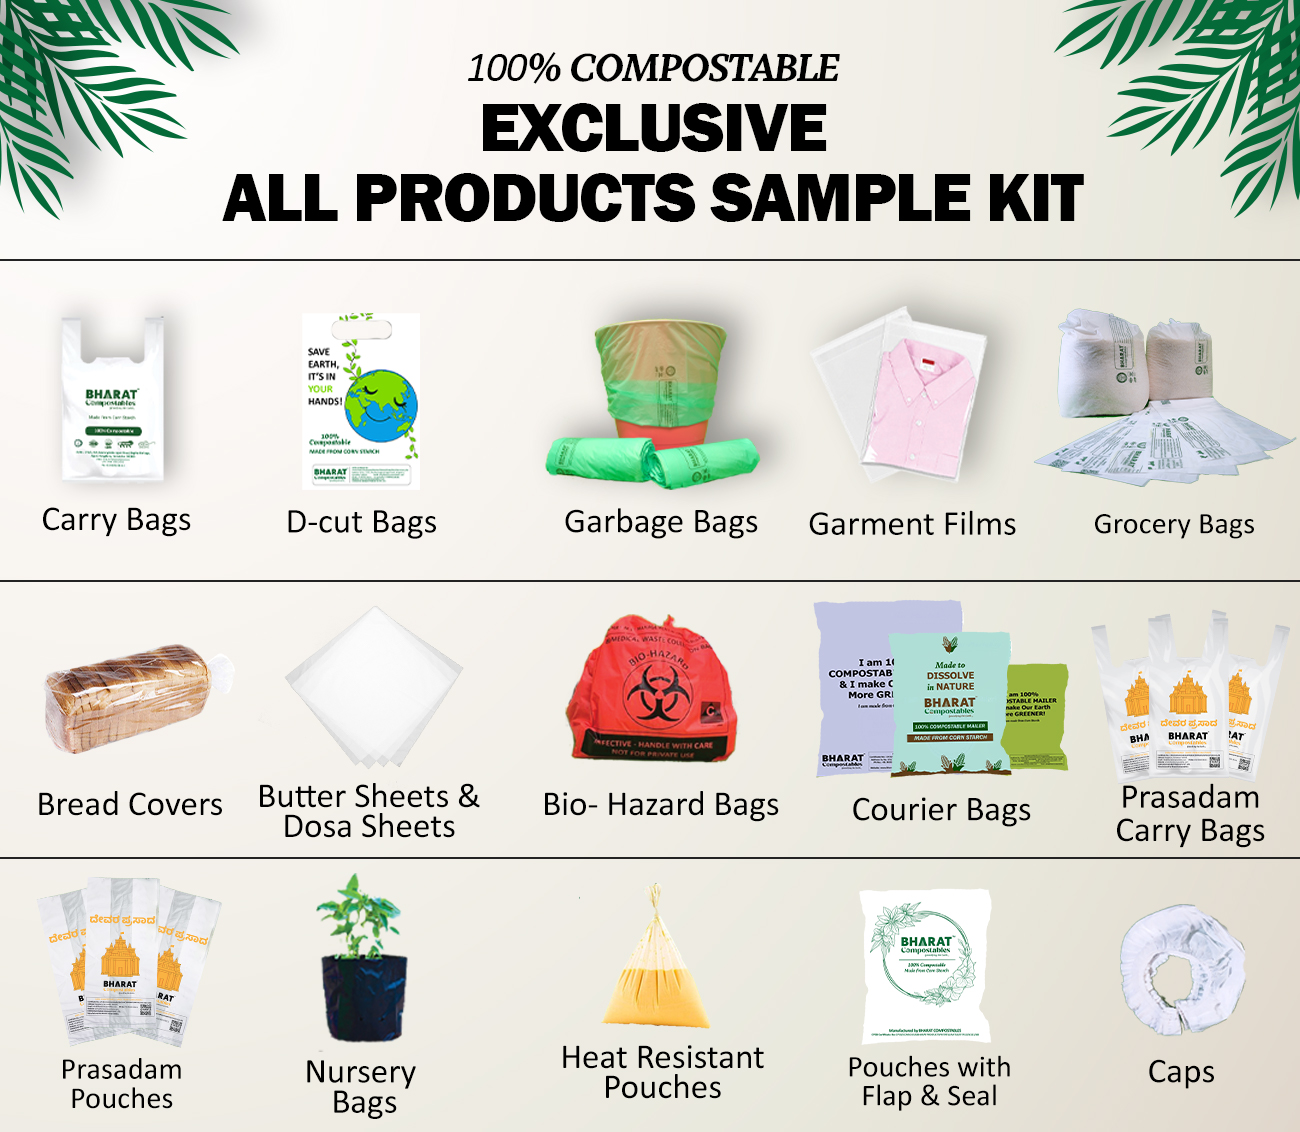 Exclusive product samples